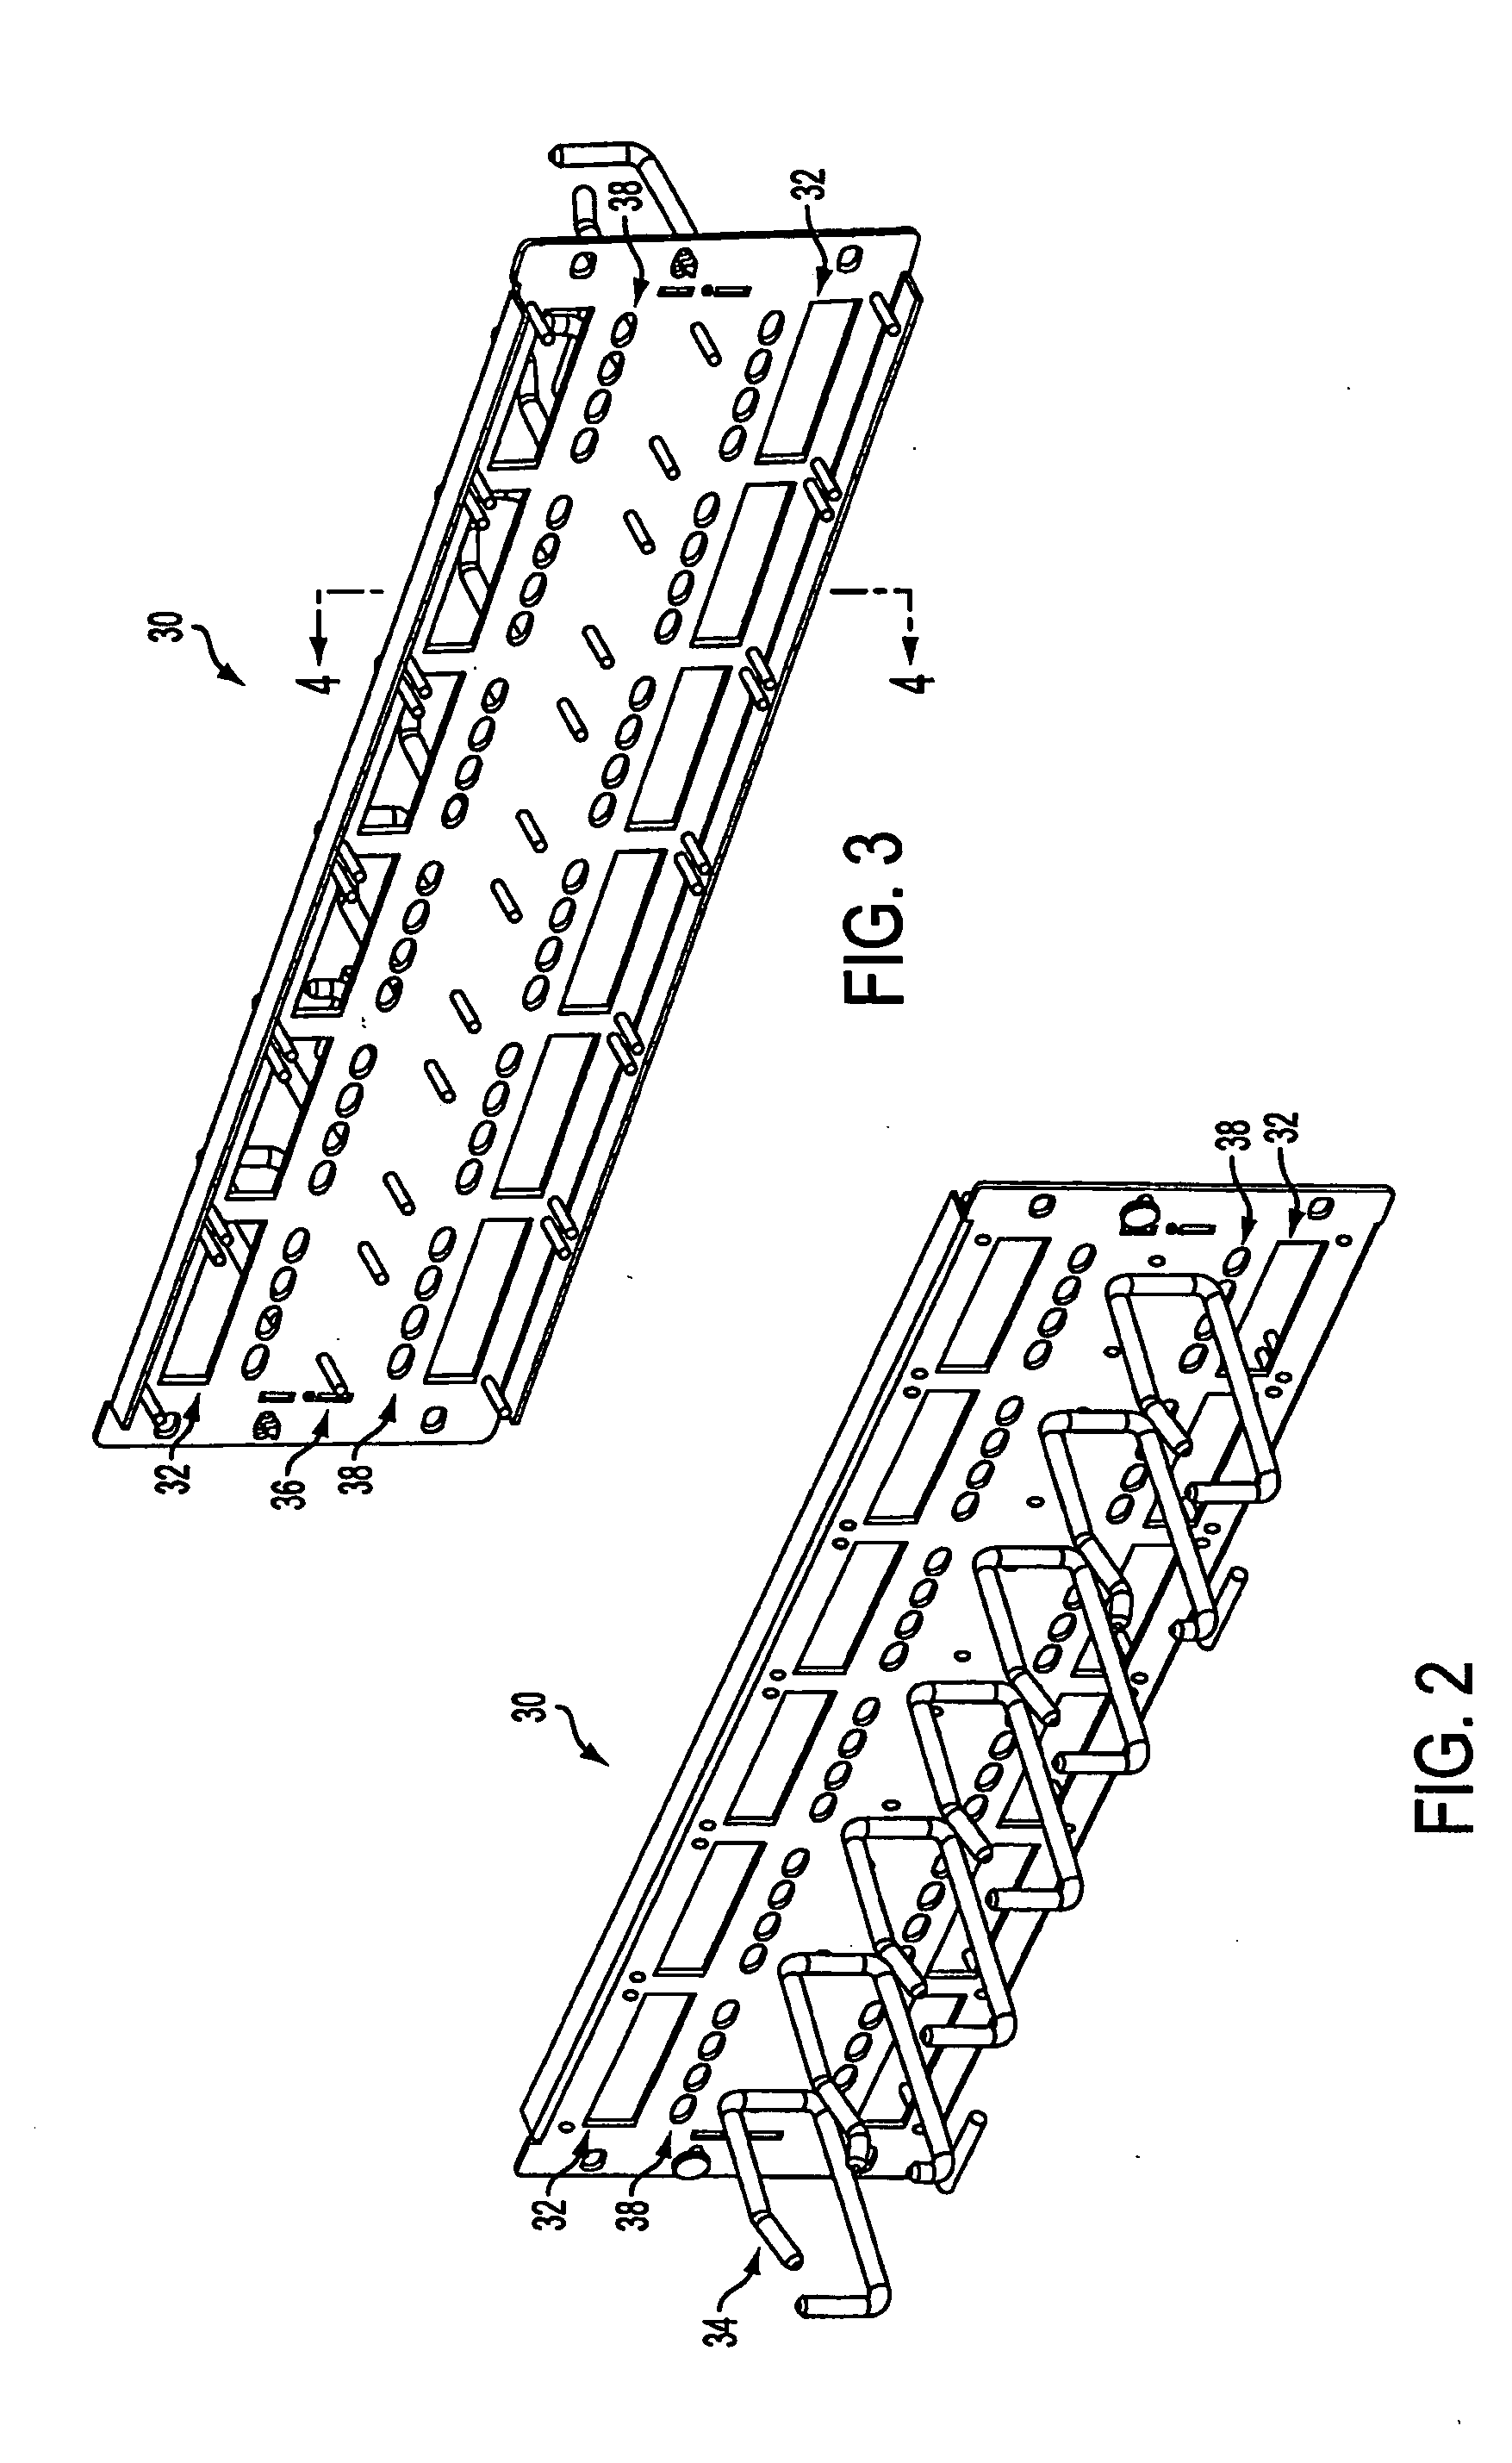 Midspan patch panel with compensation circuit for data terminal equipment, power insertion and data collection